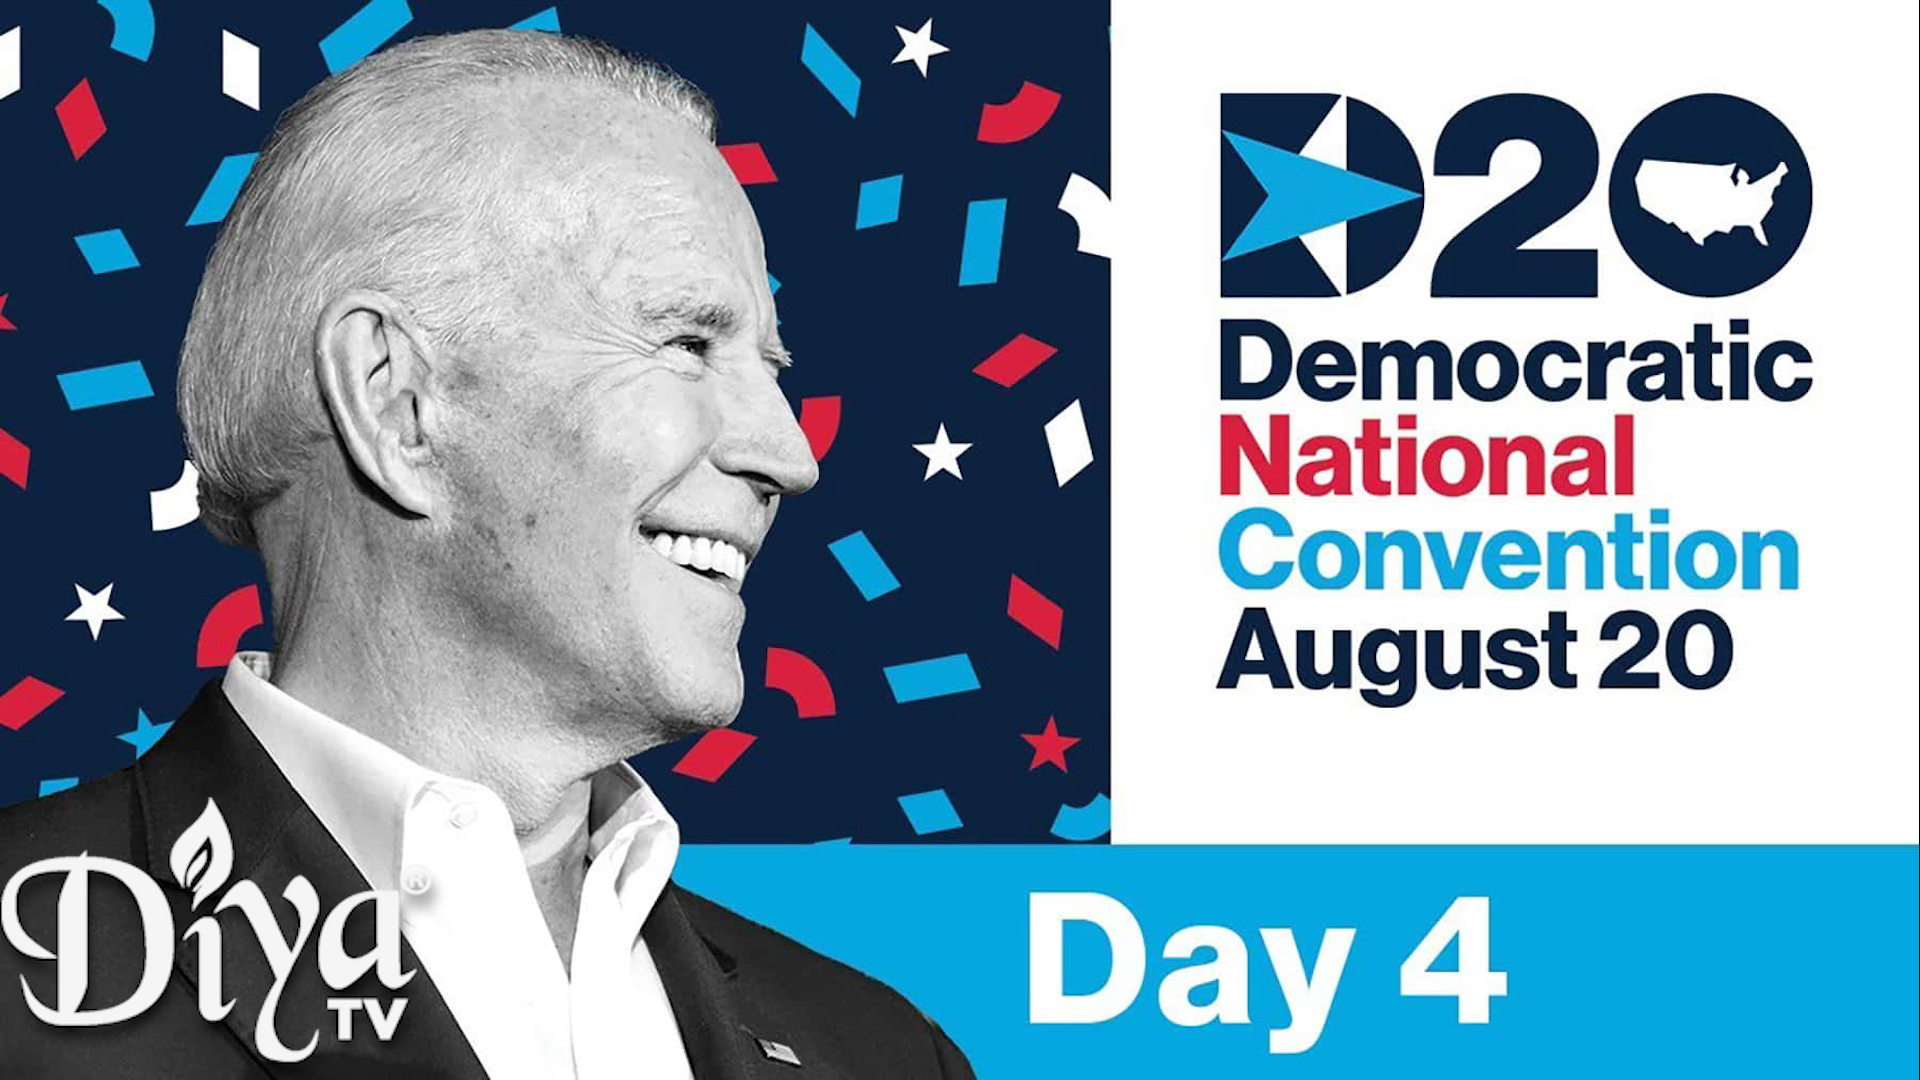 Joe Biden’s Full Remarks at the 2020 Democratic National Convention